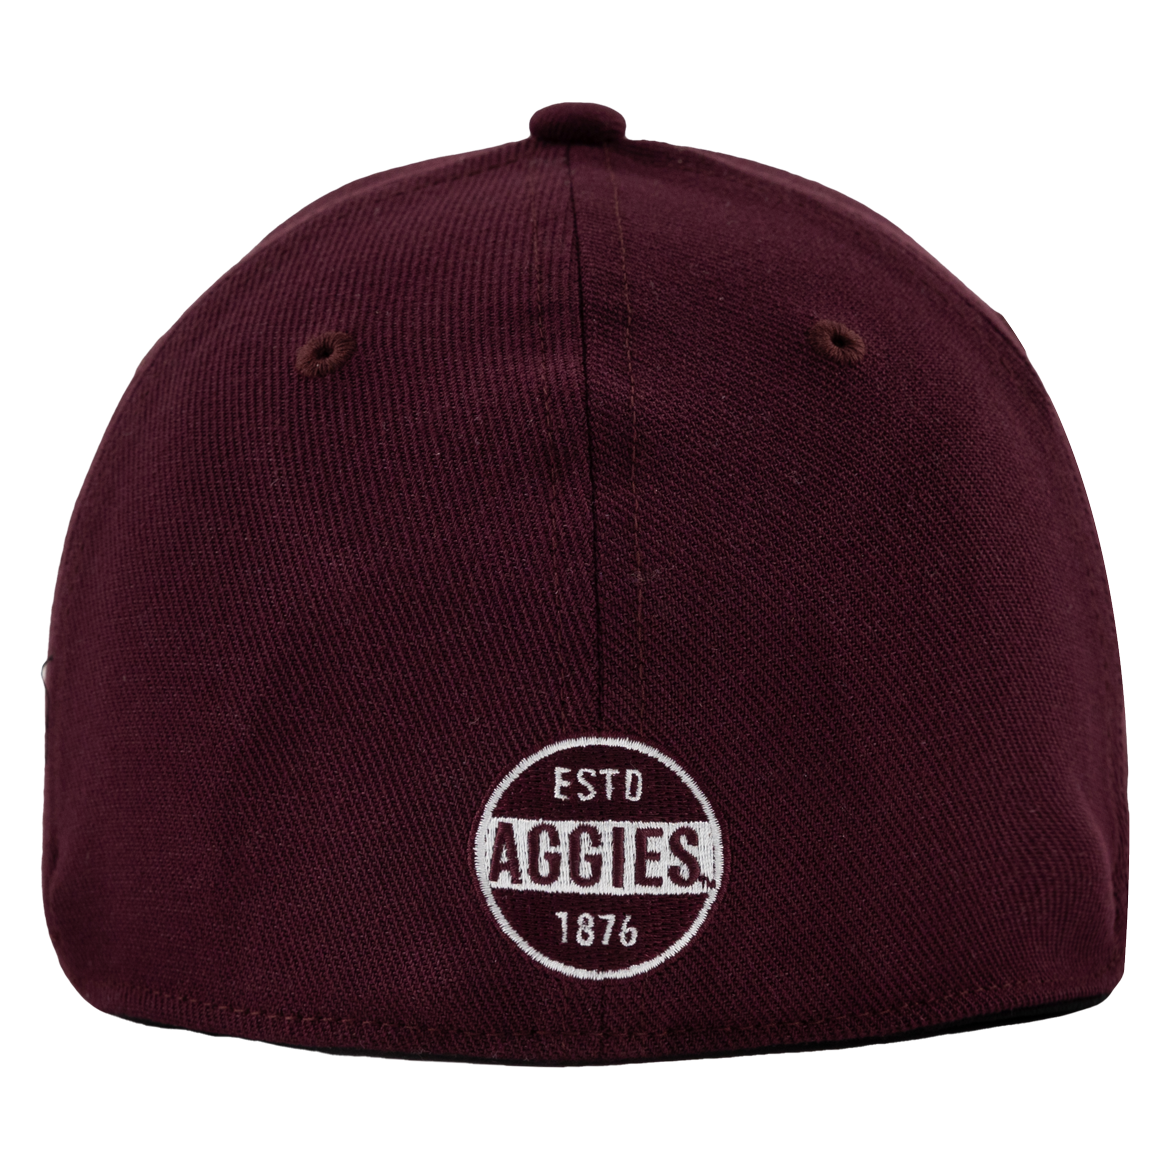 Aggies Block T Cotton Slouch Stretch Hat